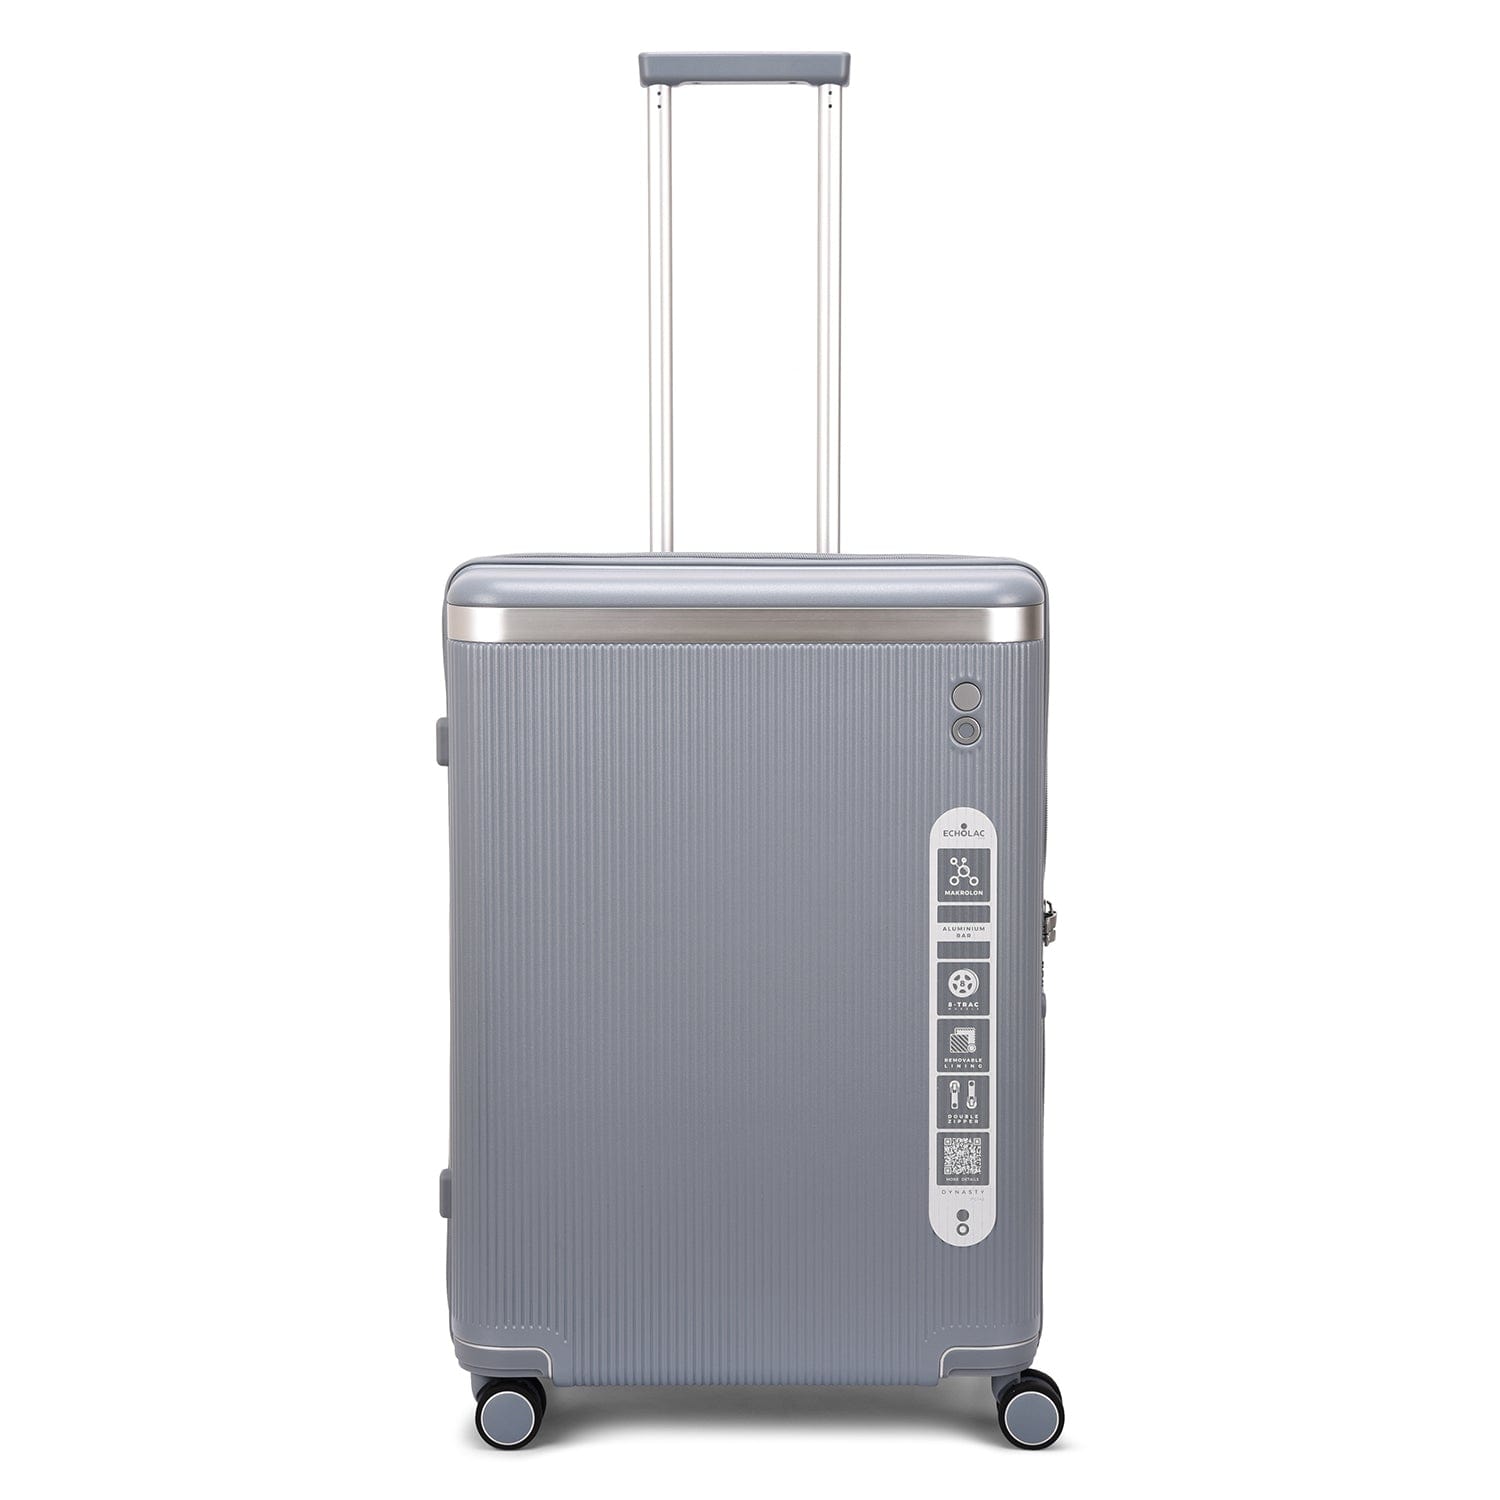 Echolac Dynasty 67cm Hardcase Non-Expandable 4 Double Wheel Check-In Luggage TrolleyIce Ice Blue - PC142A 24 ICE-BLUE